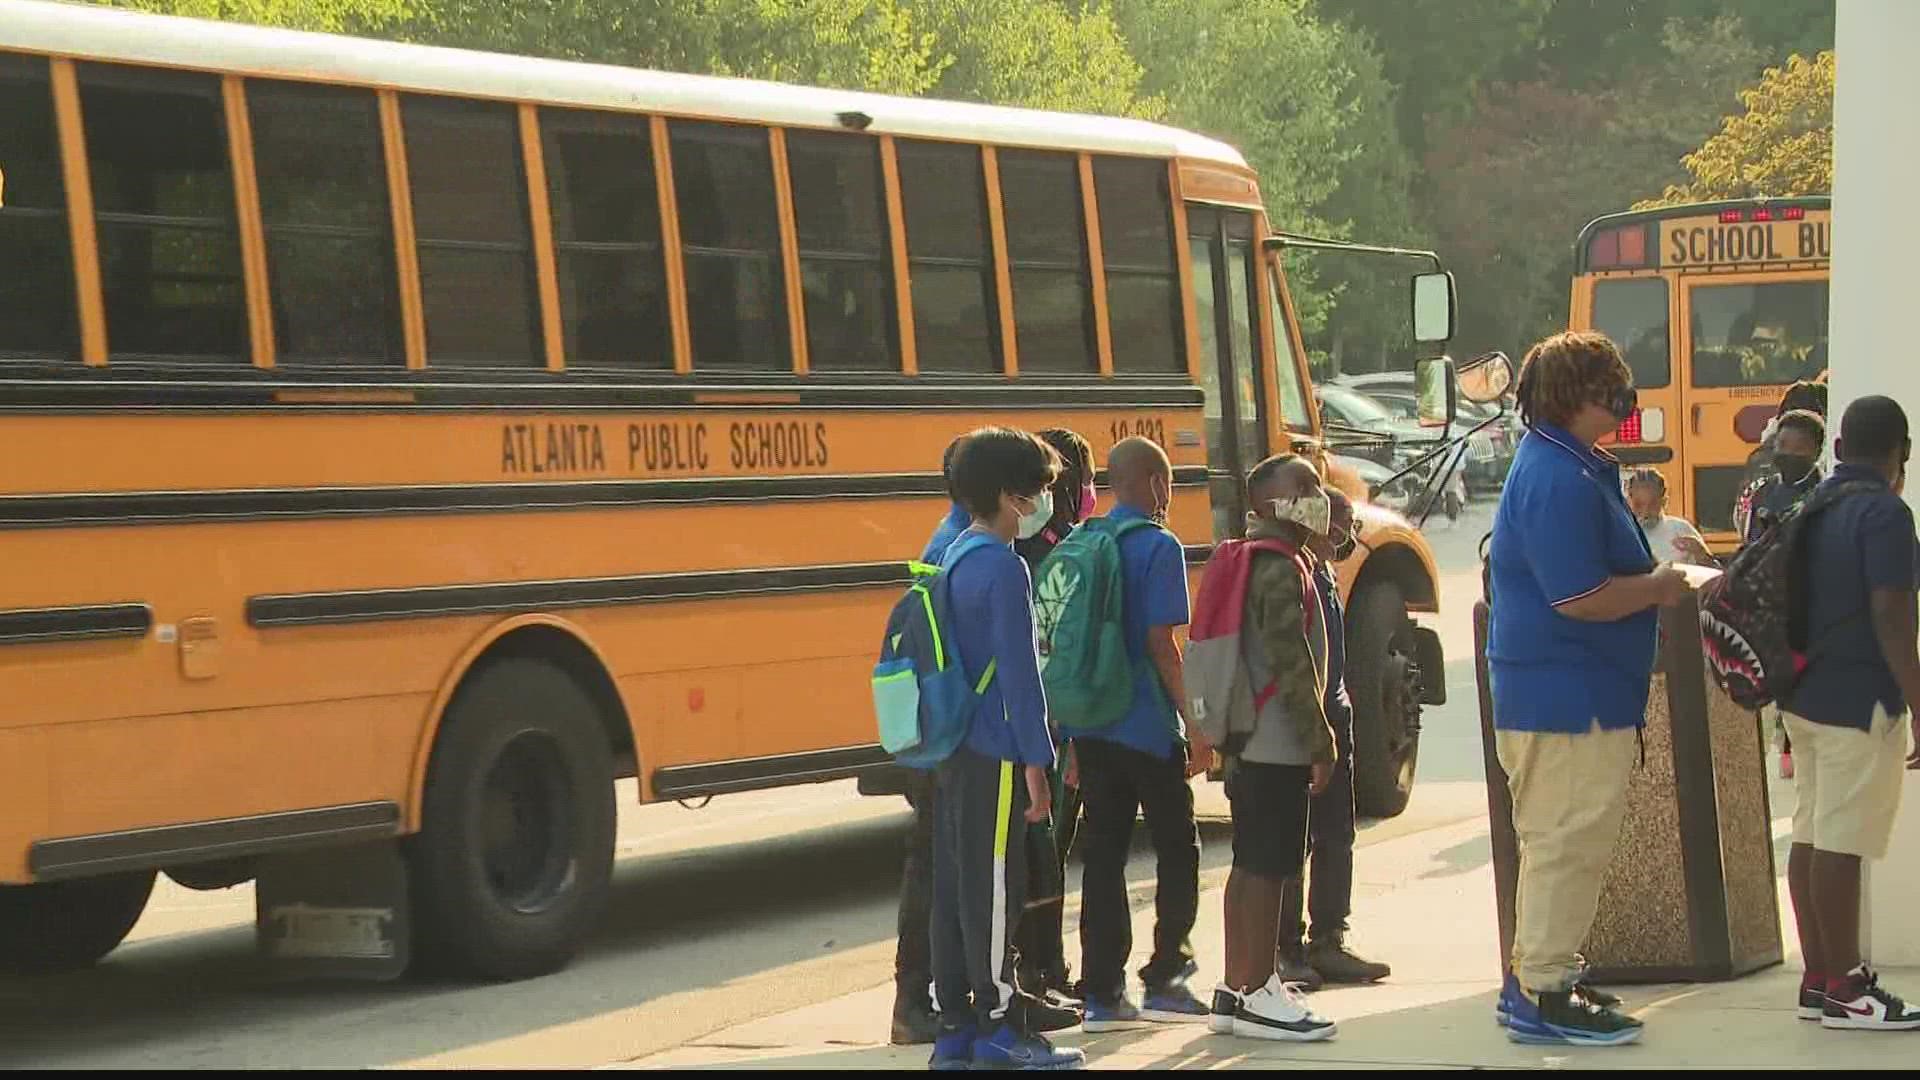 If your child rides an Atlanta Public Schools bus, they no longer have to mask up.